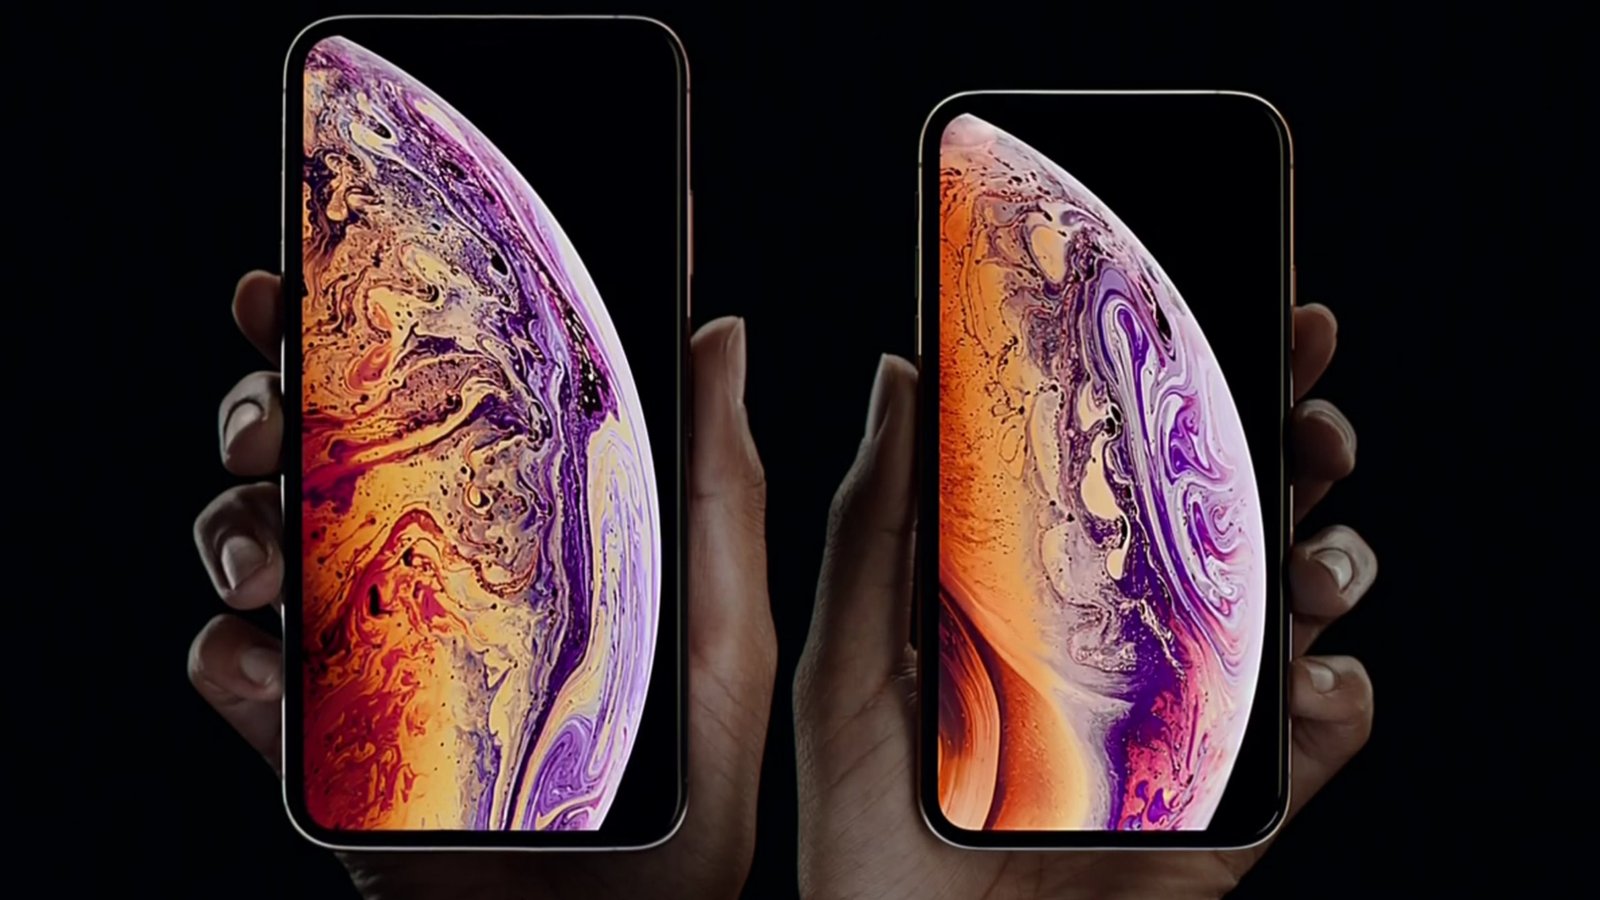 Apple introduced the new Apple iPhone Xs and iPhone Xs Max